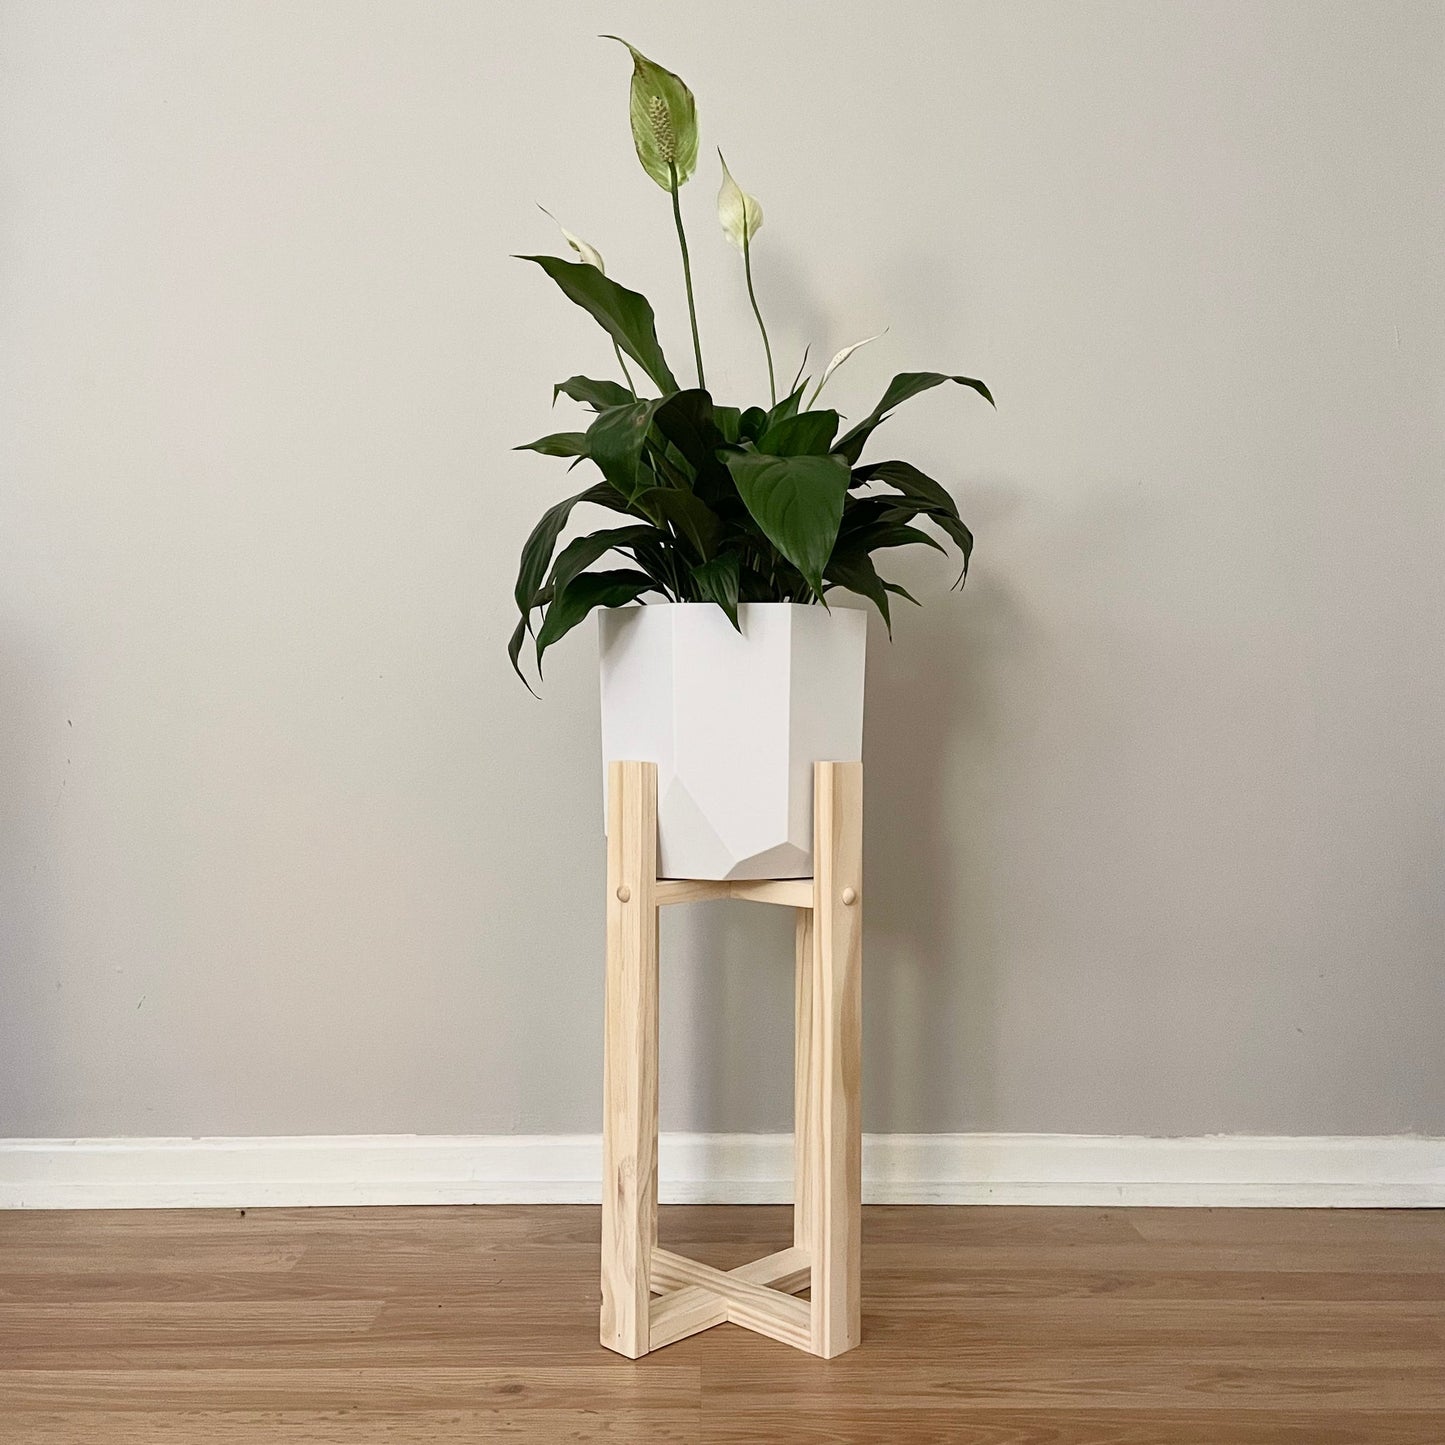 Plant Stands in Natural Pine - Project Pine Designs